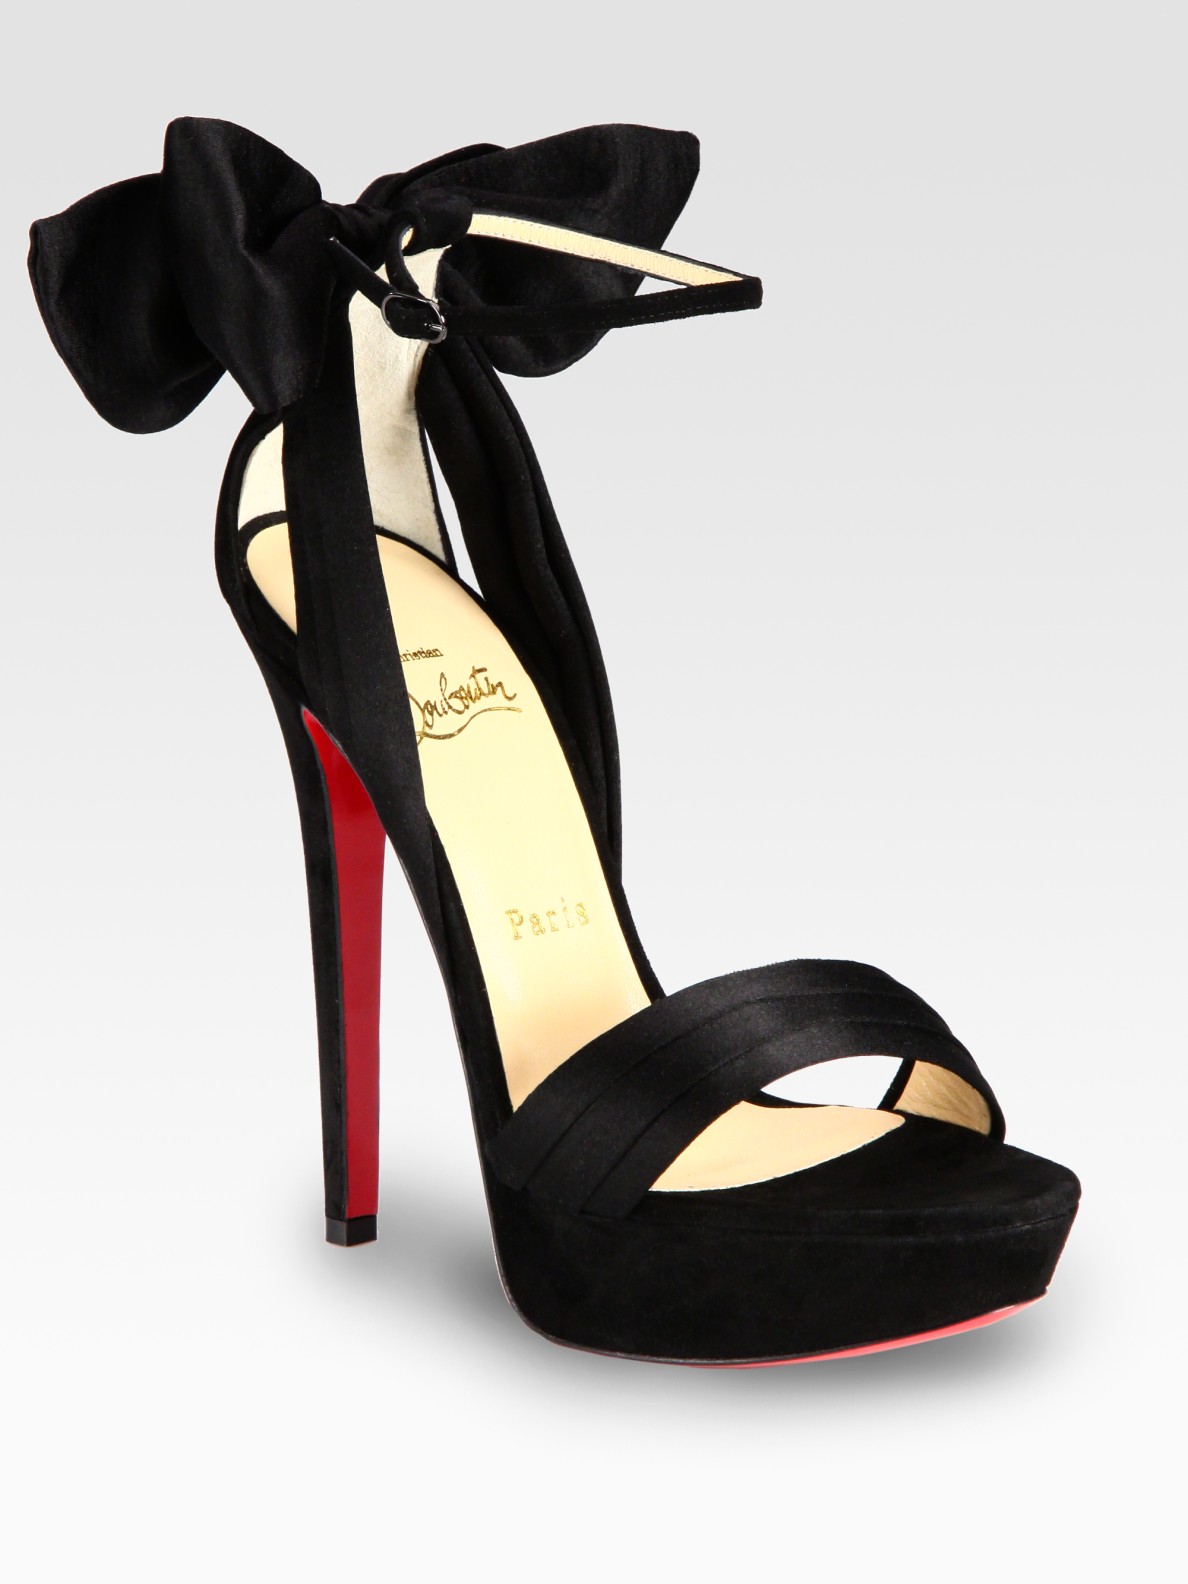 Christian Louboutin Satin and Suede Bow Platform Sandals in Black | Lyst